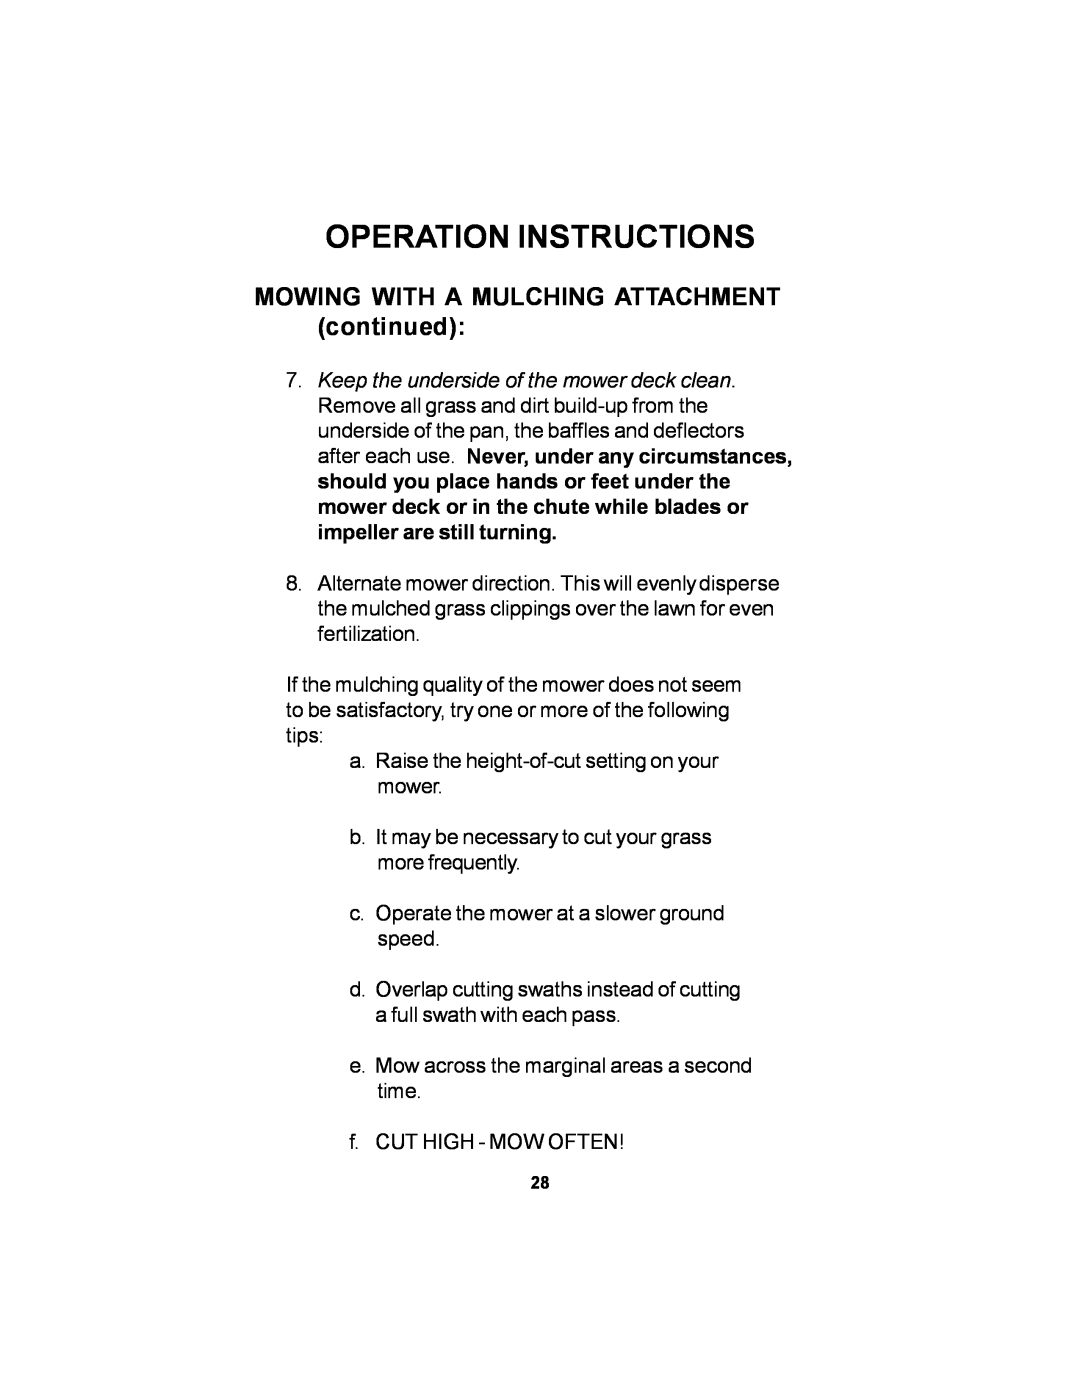 Dixon 11249-106 manual MOWING WITH A MULCHING ATTACHMENT continued, Operation Instructions 